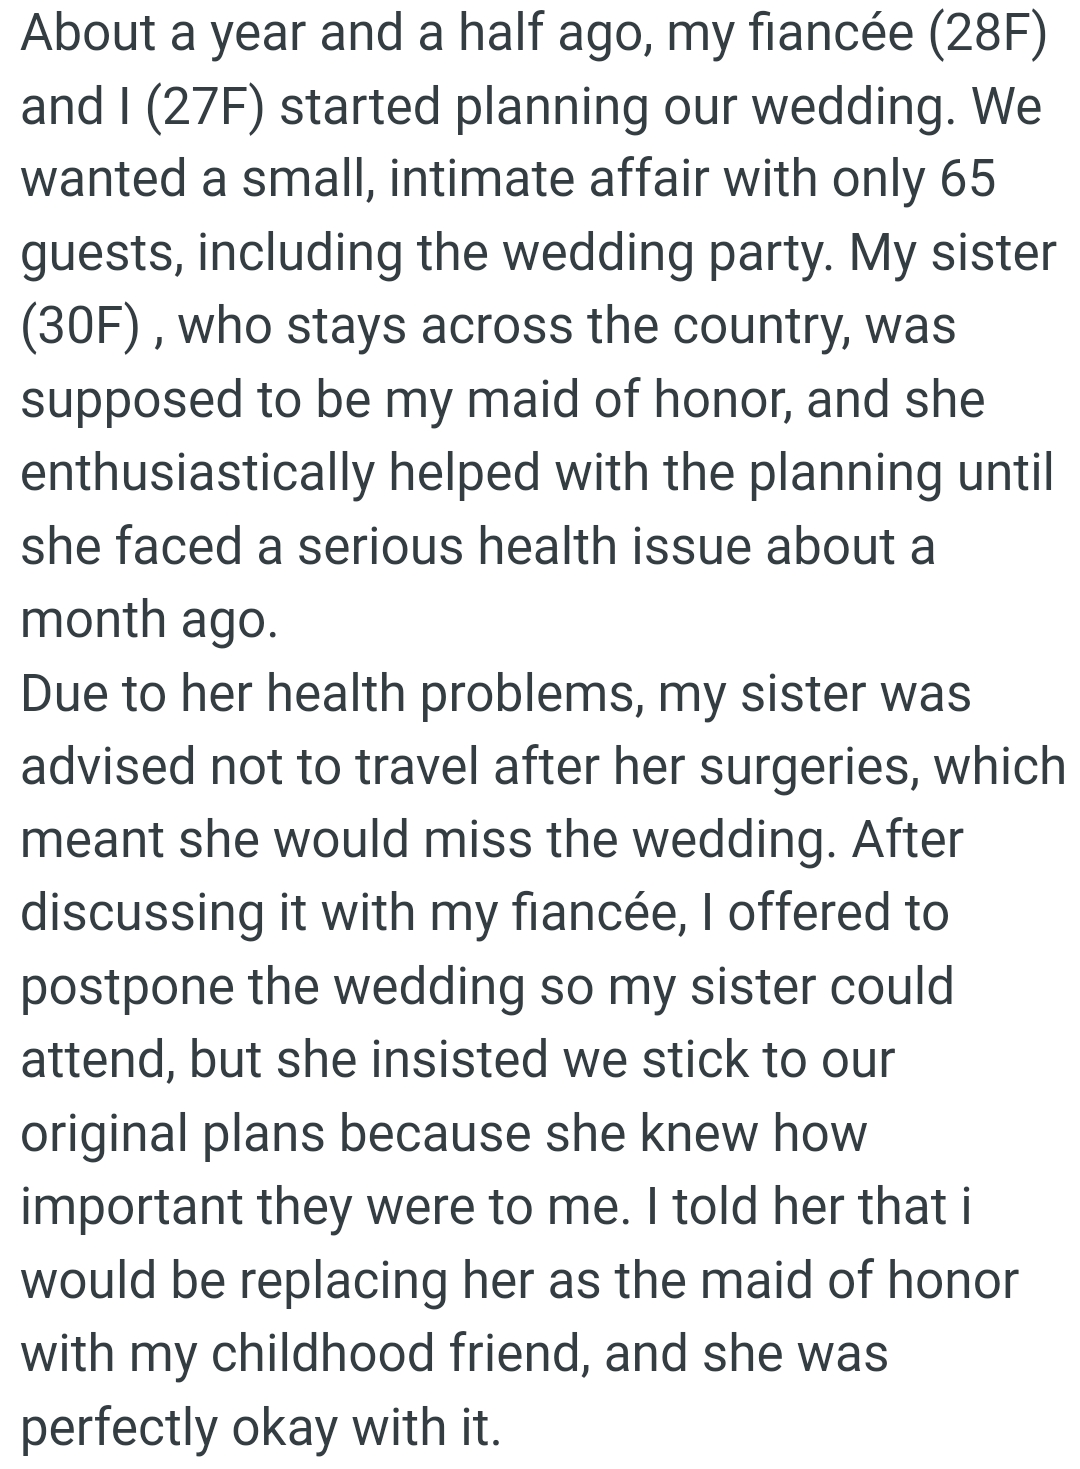 OP's sister who stays across the country, was supposed to be OP's maid of honor